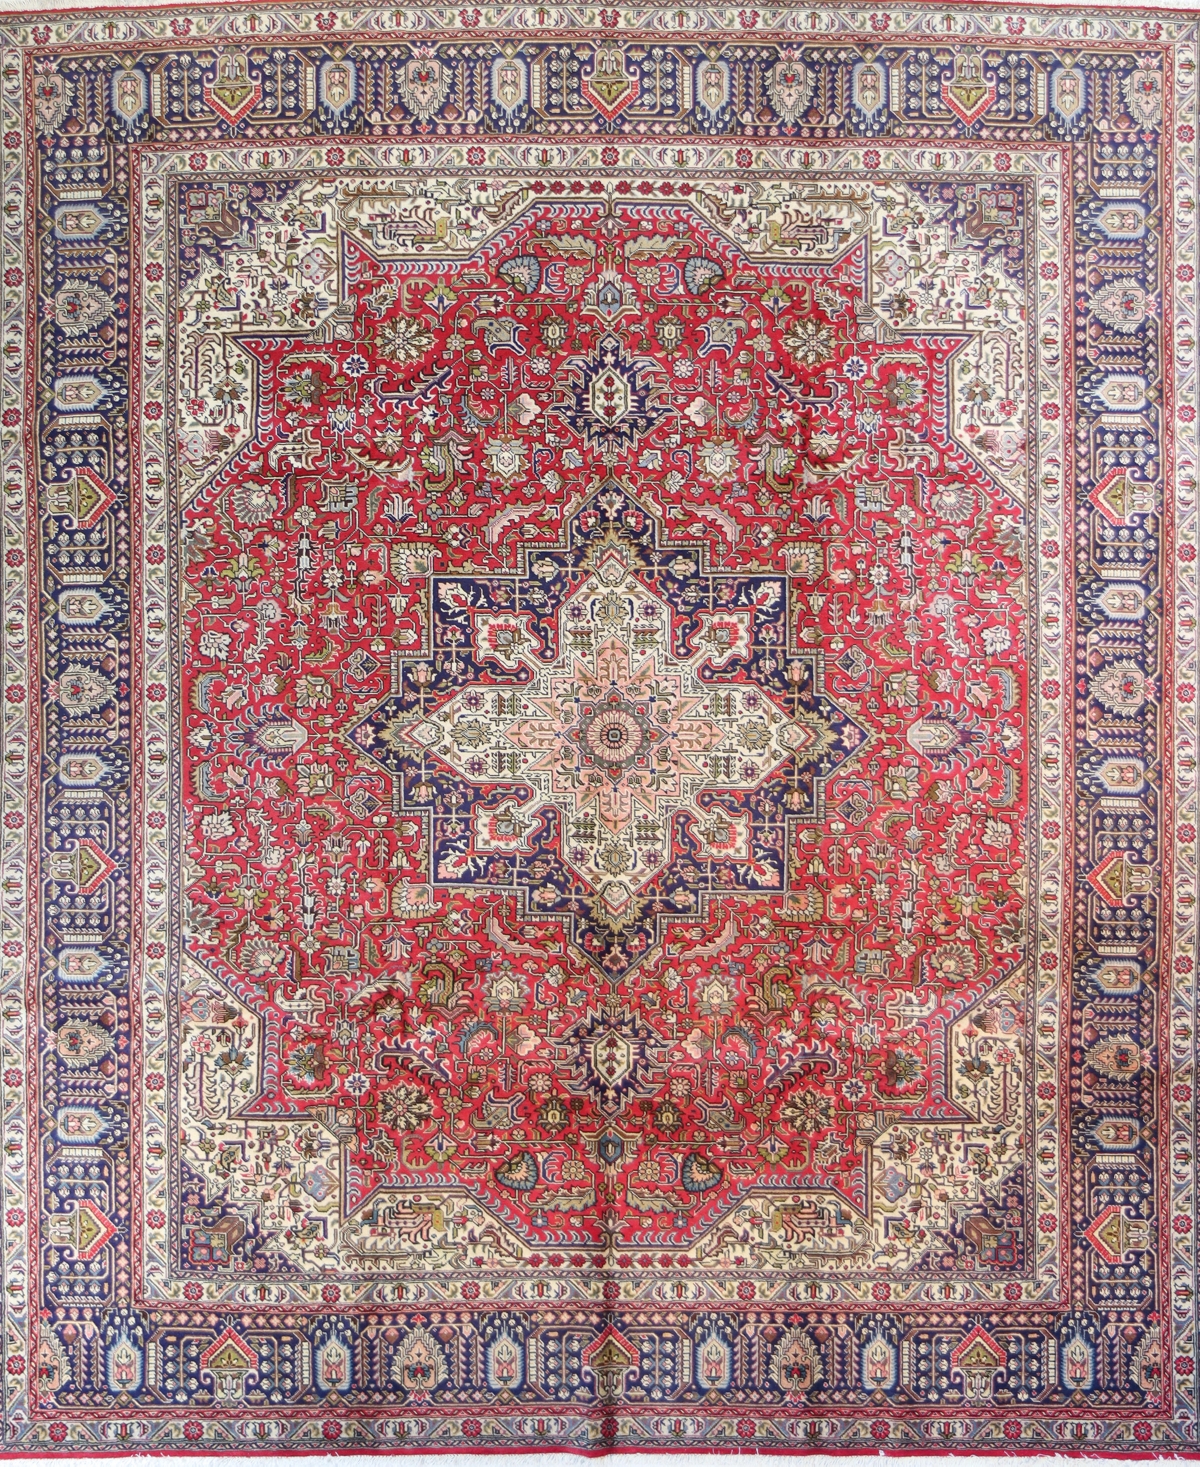 Bb Rugs One of a Kind Tabriz 625437 9'9in x 12'6in Area Rug - Red